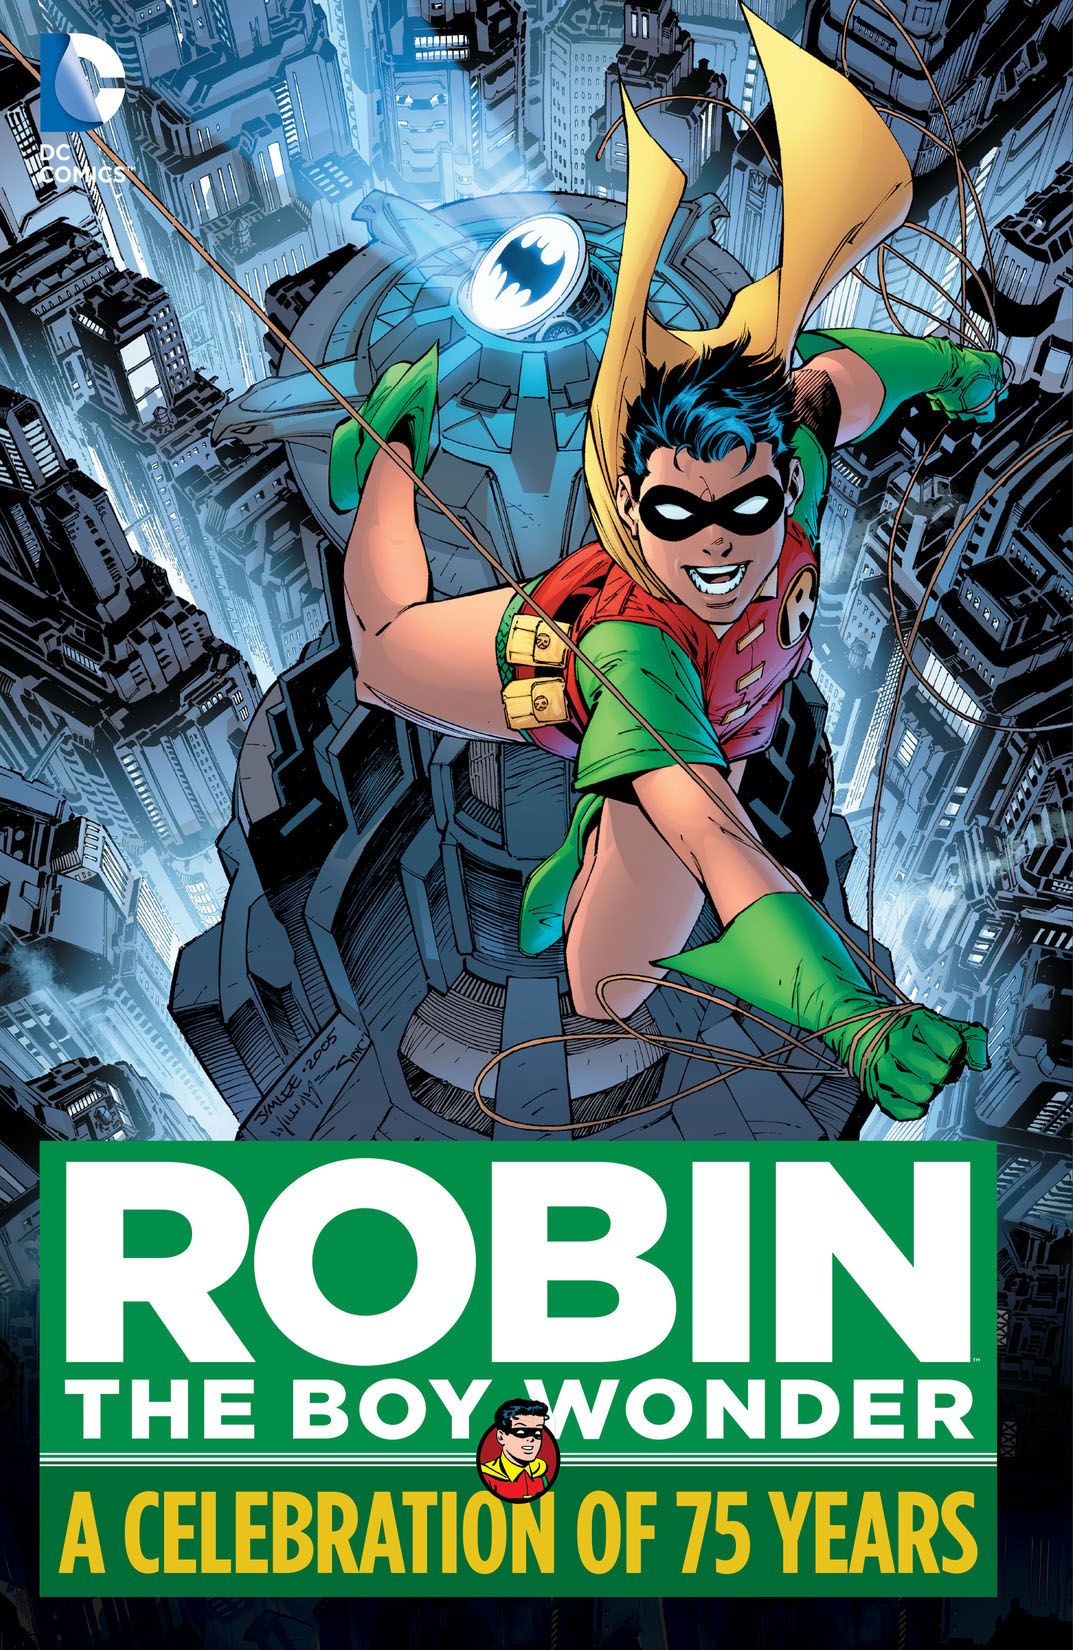 Robin The Boy Wonder: A Celebration of 75 Years preview images